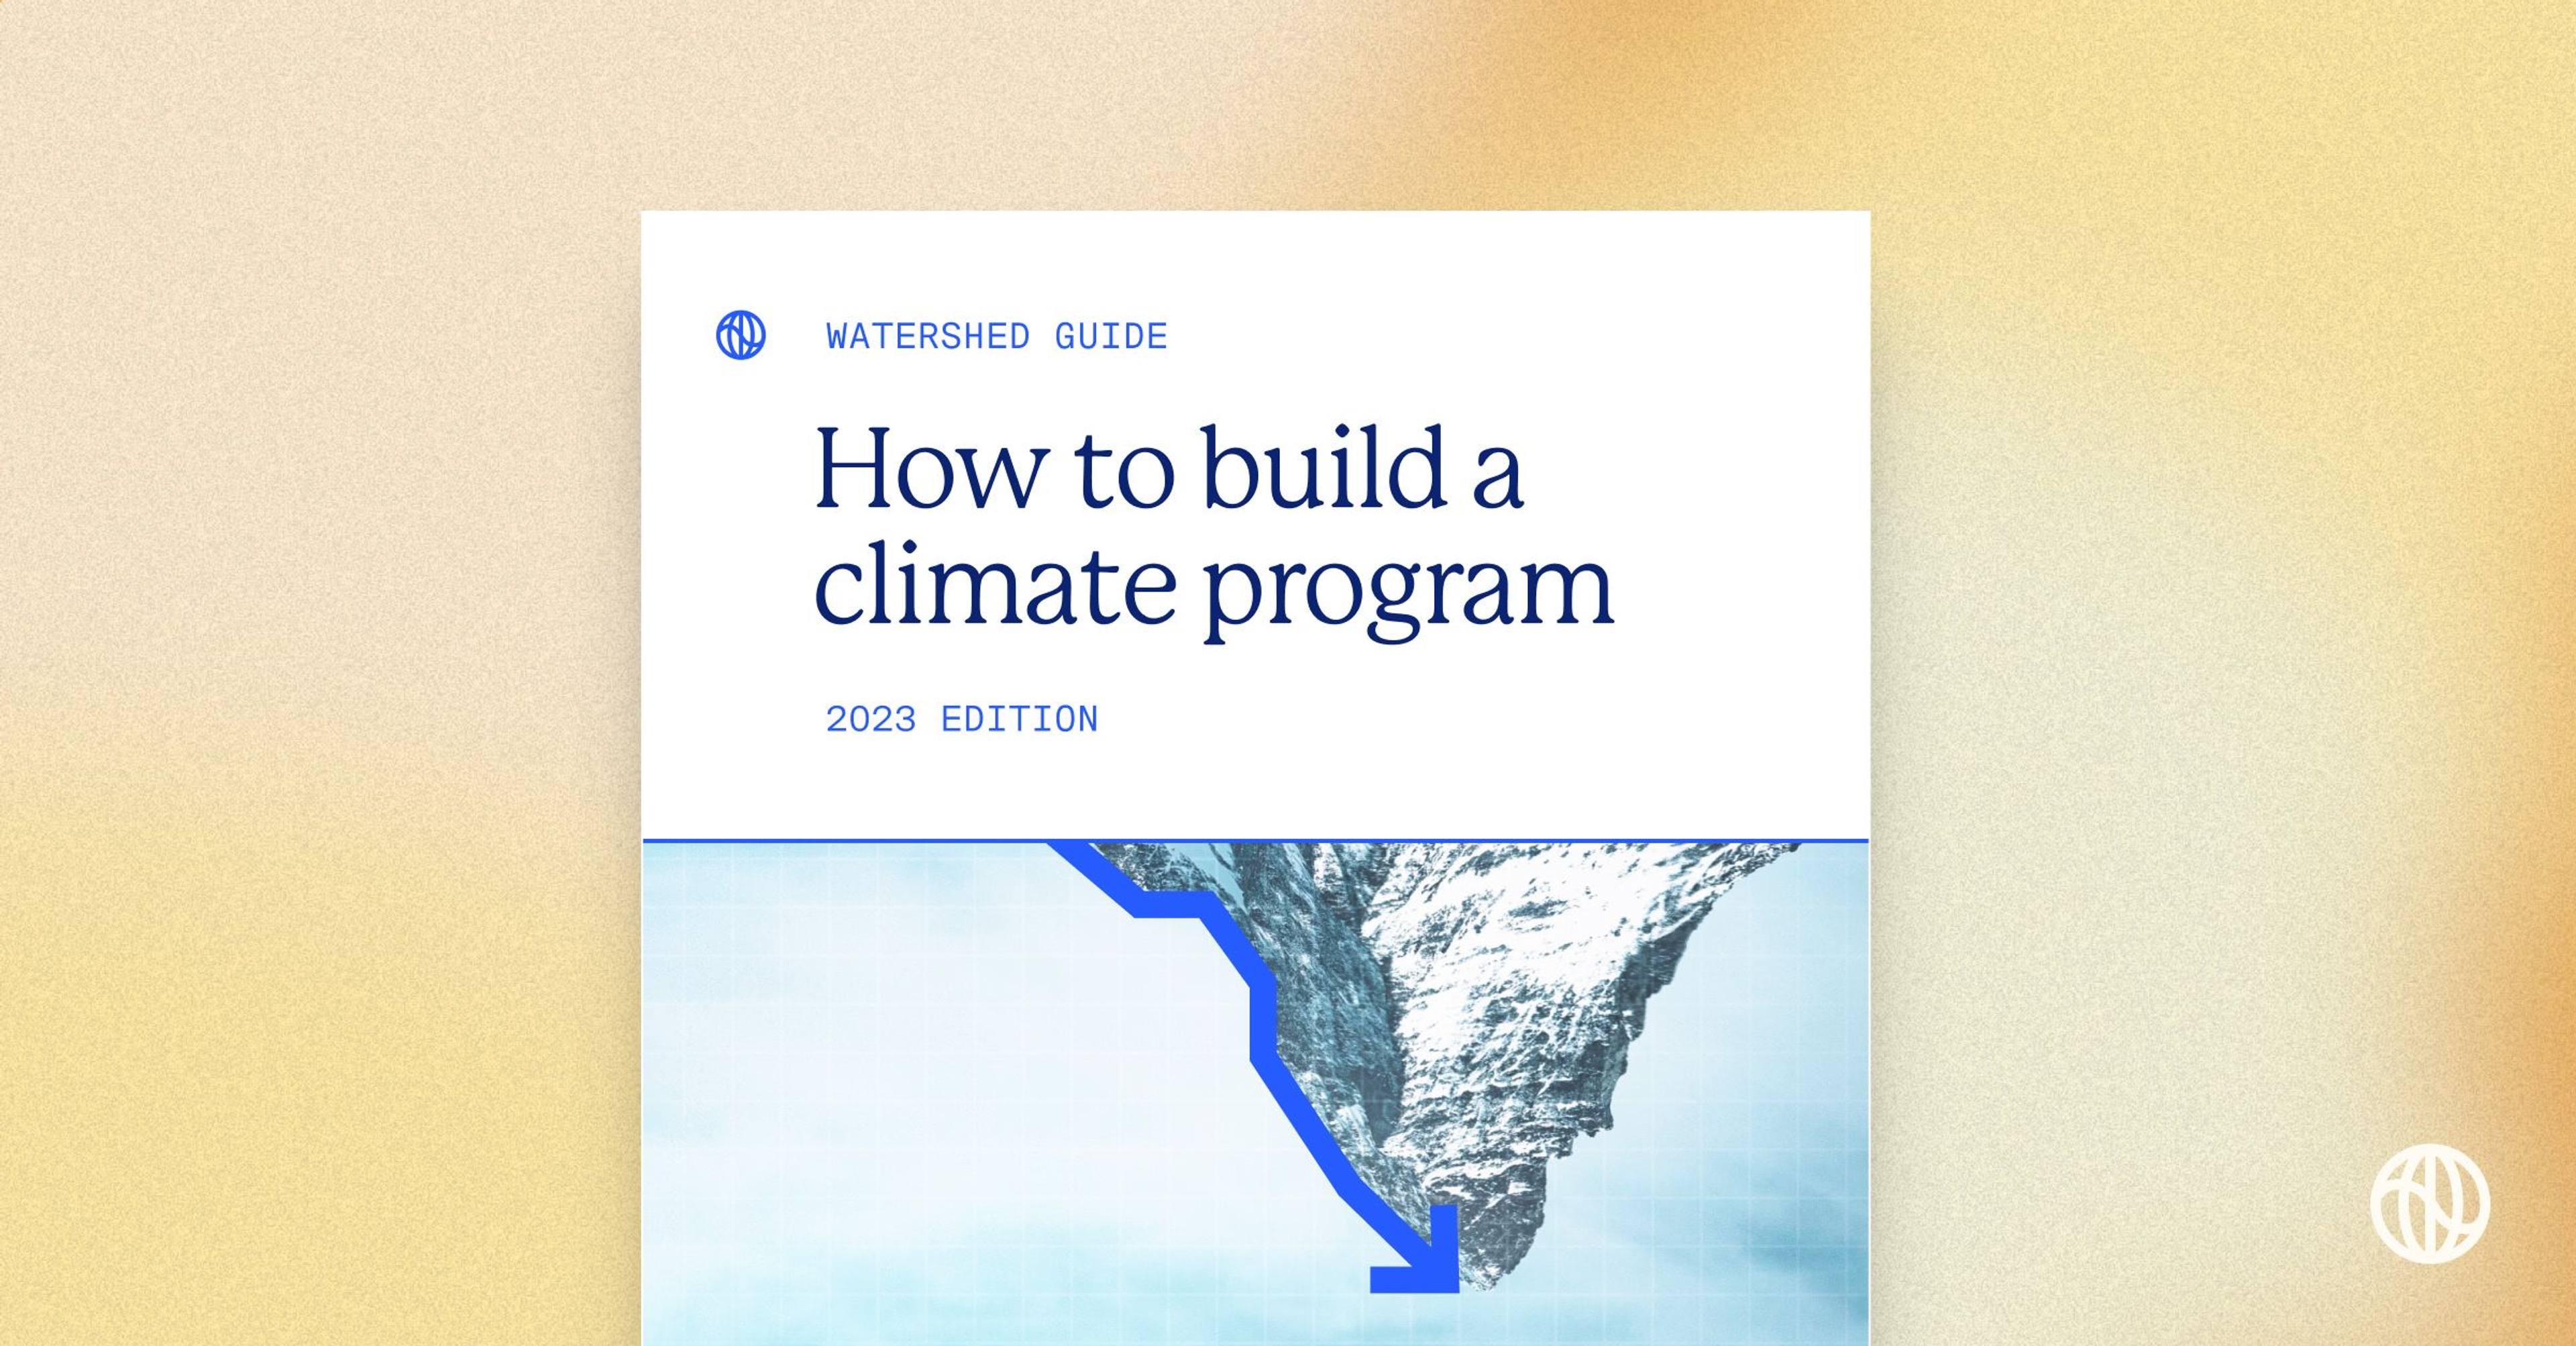 Mockup of Watershed Guide with mountain illustration on the cover